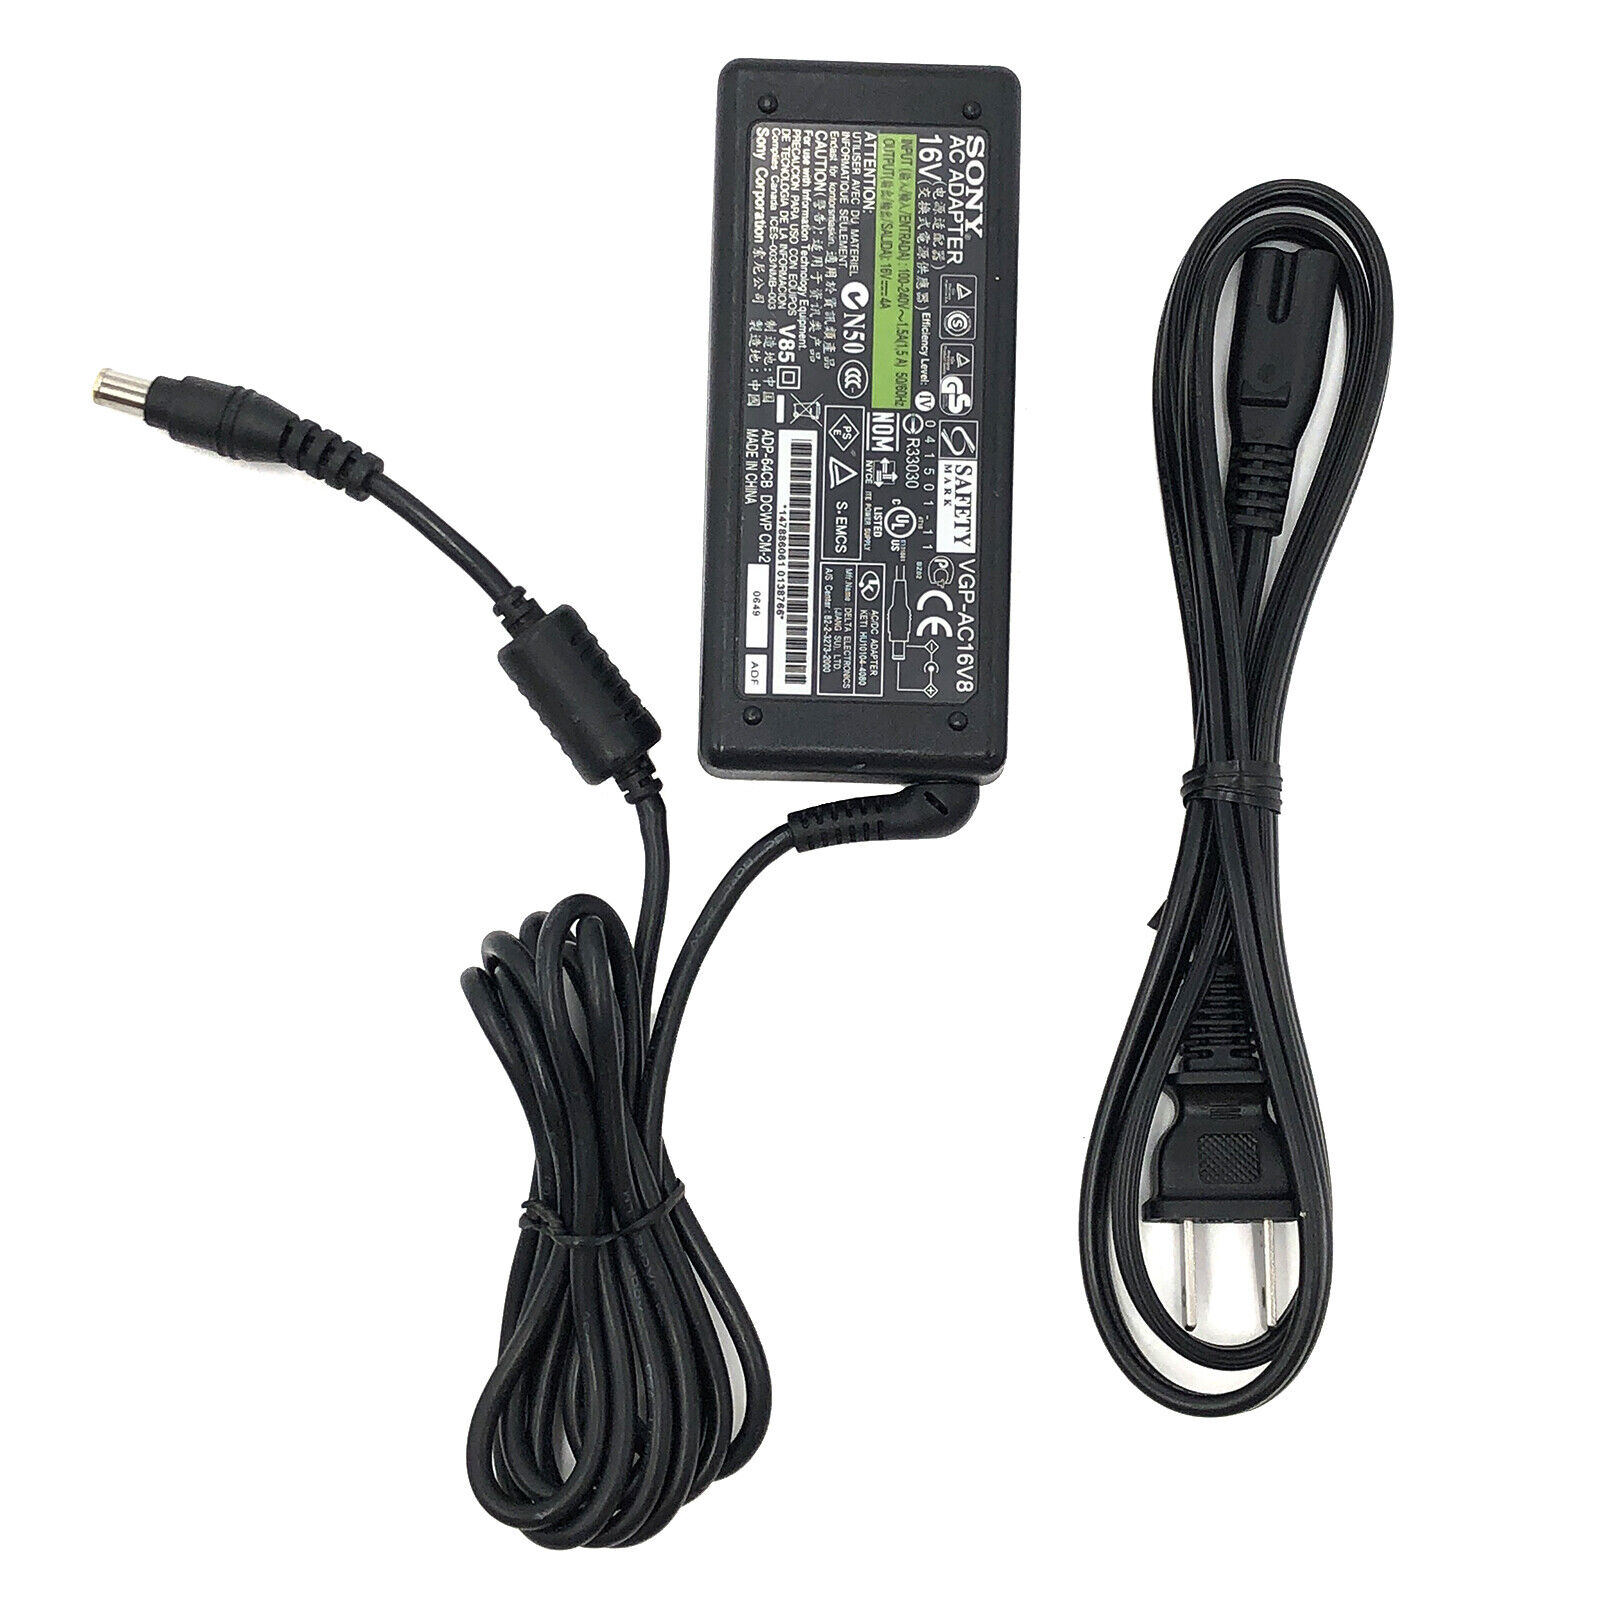 Genuine AC Power Adapter 65W for Sony VAIO VGN-TZ10 VGN-TZ Series Charger